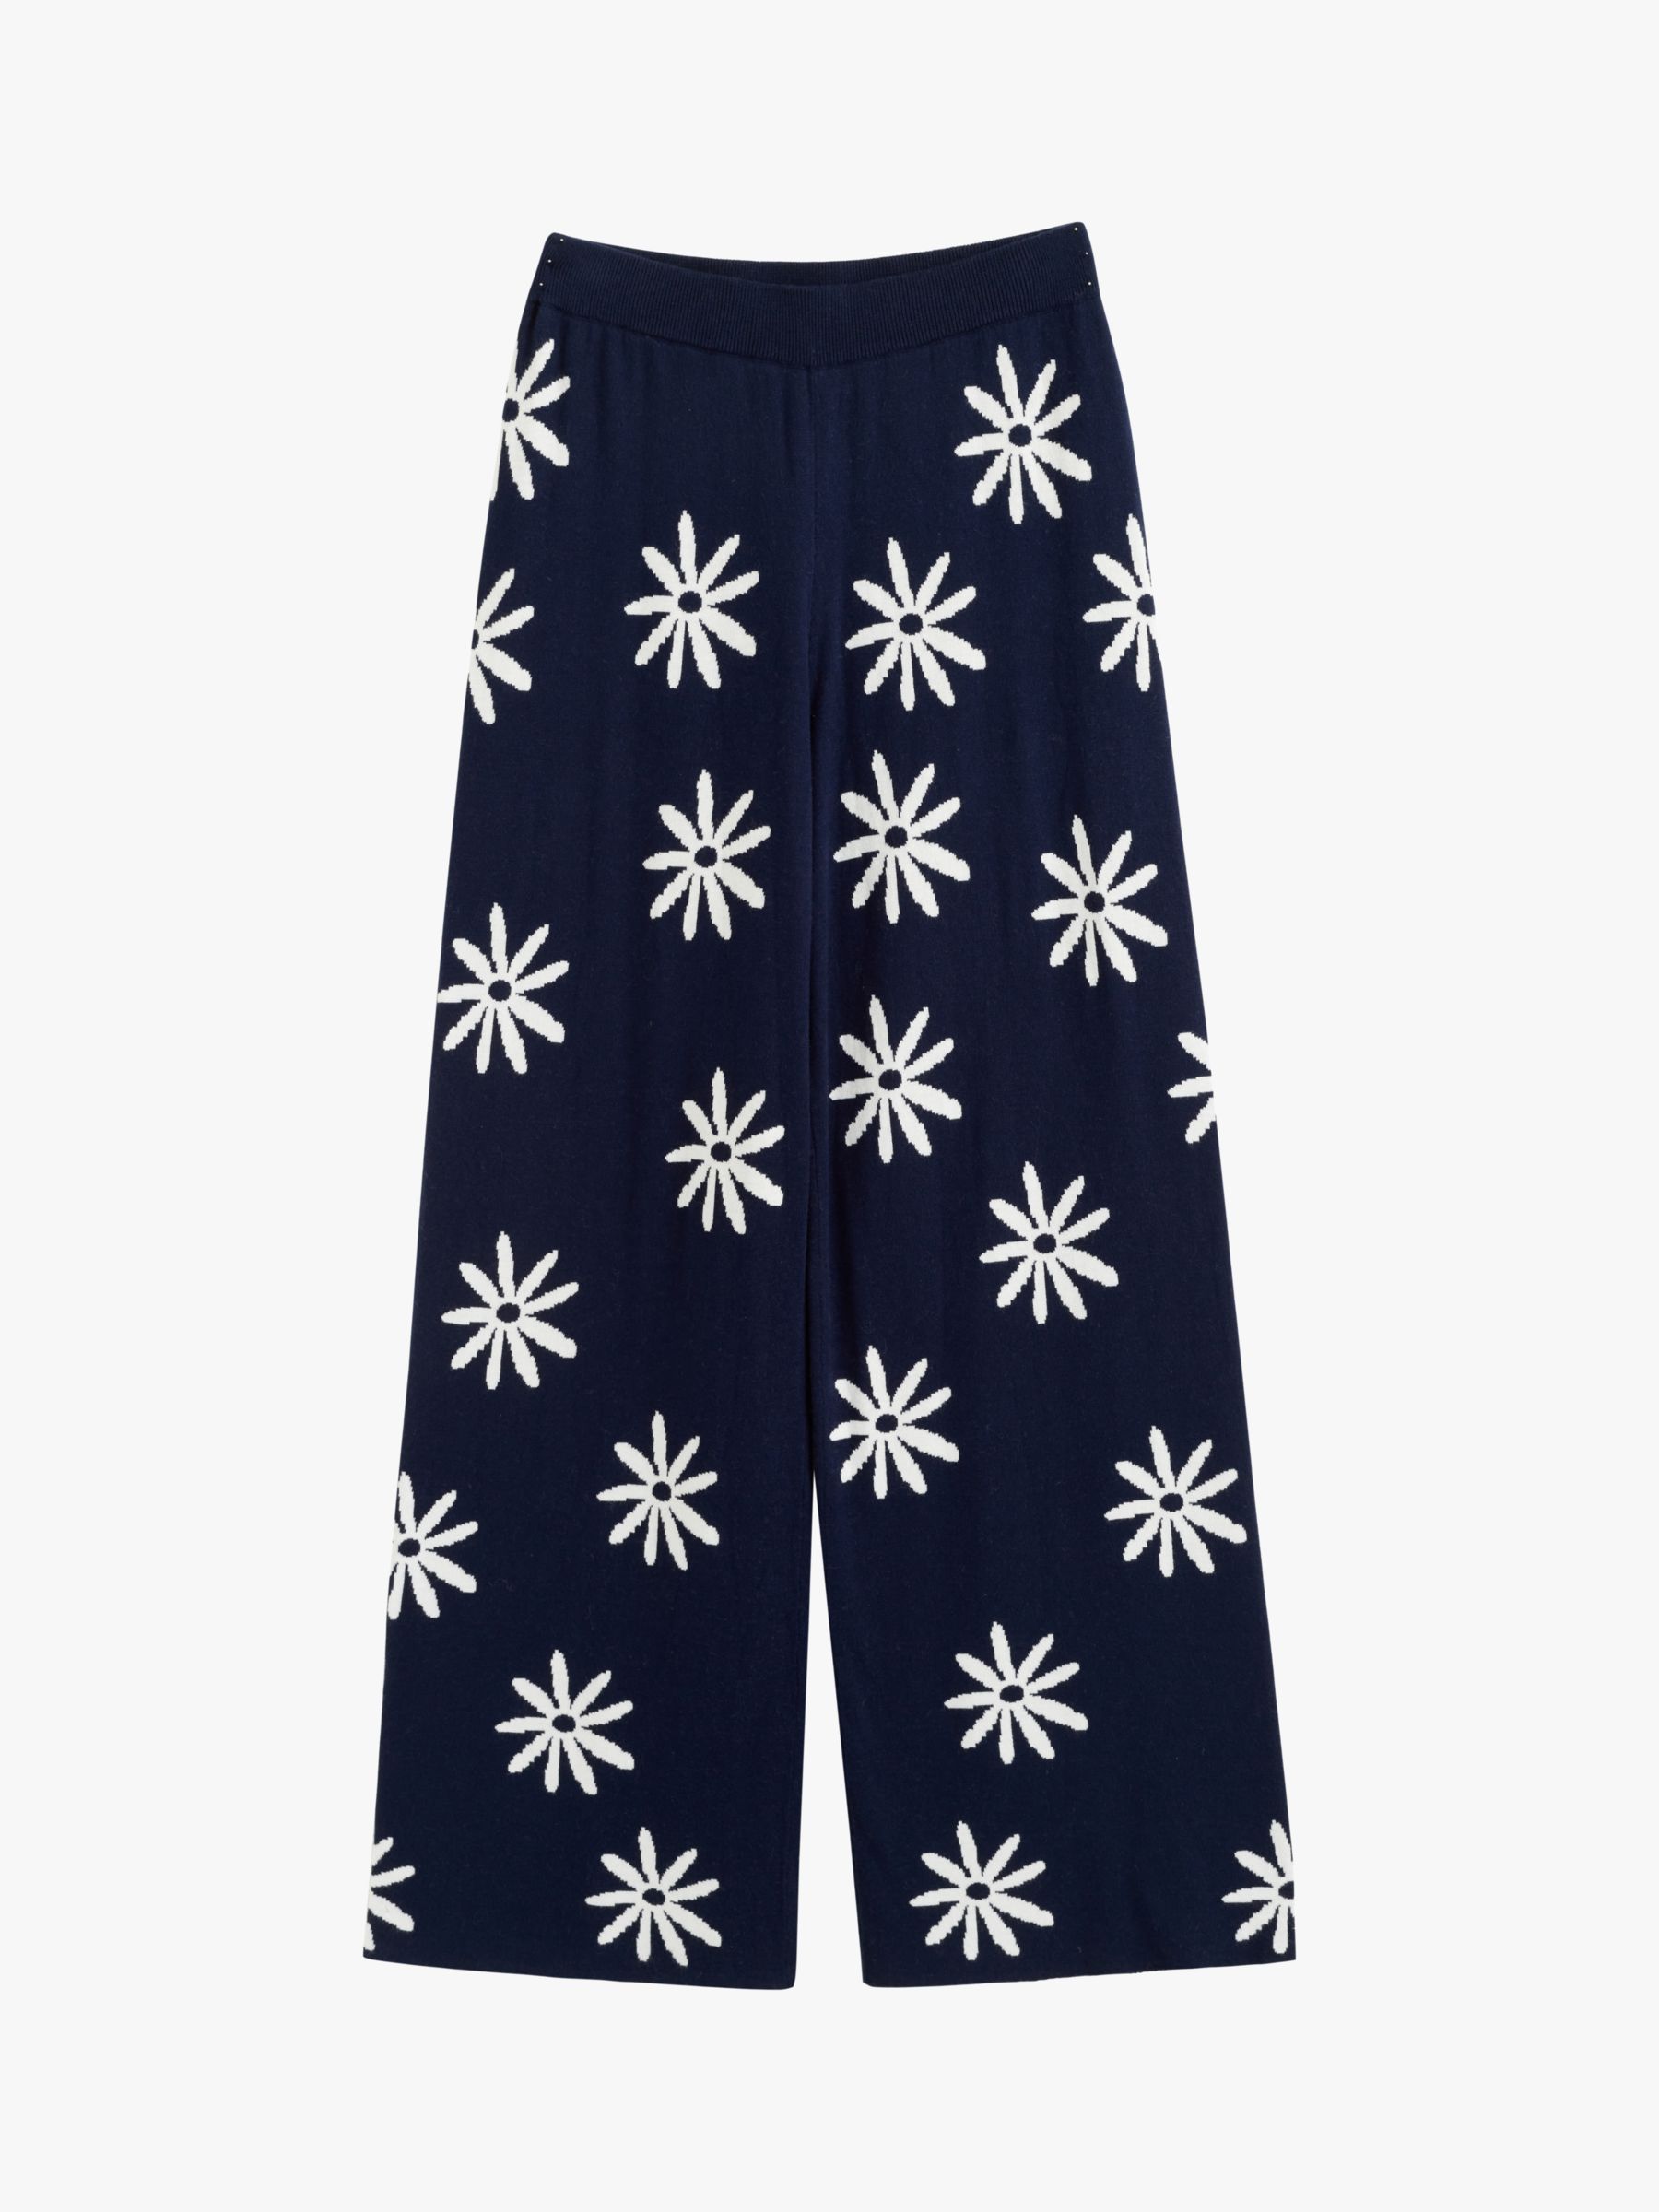 Chinti & Parker Ditsy Daisy Cashmere Blend Joggers, Deep Navy/Multi, XS